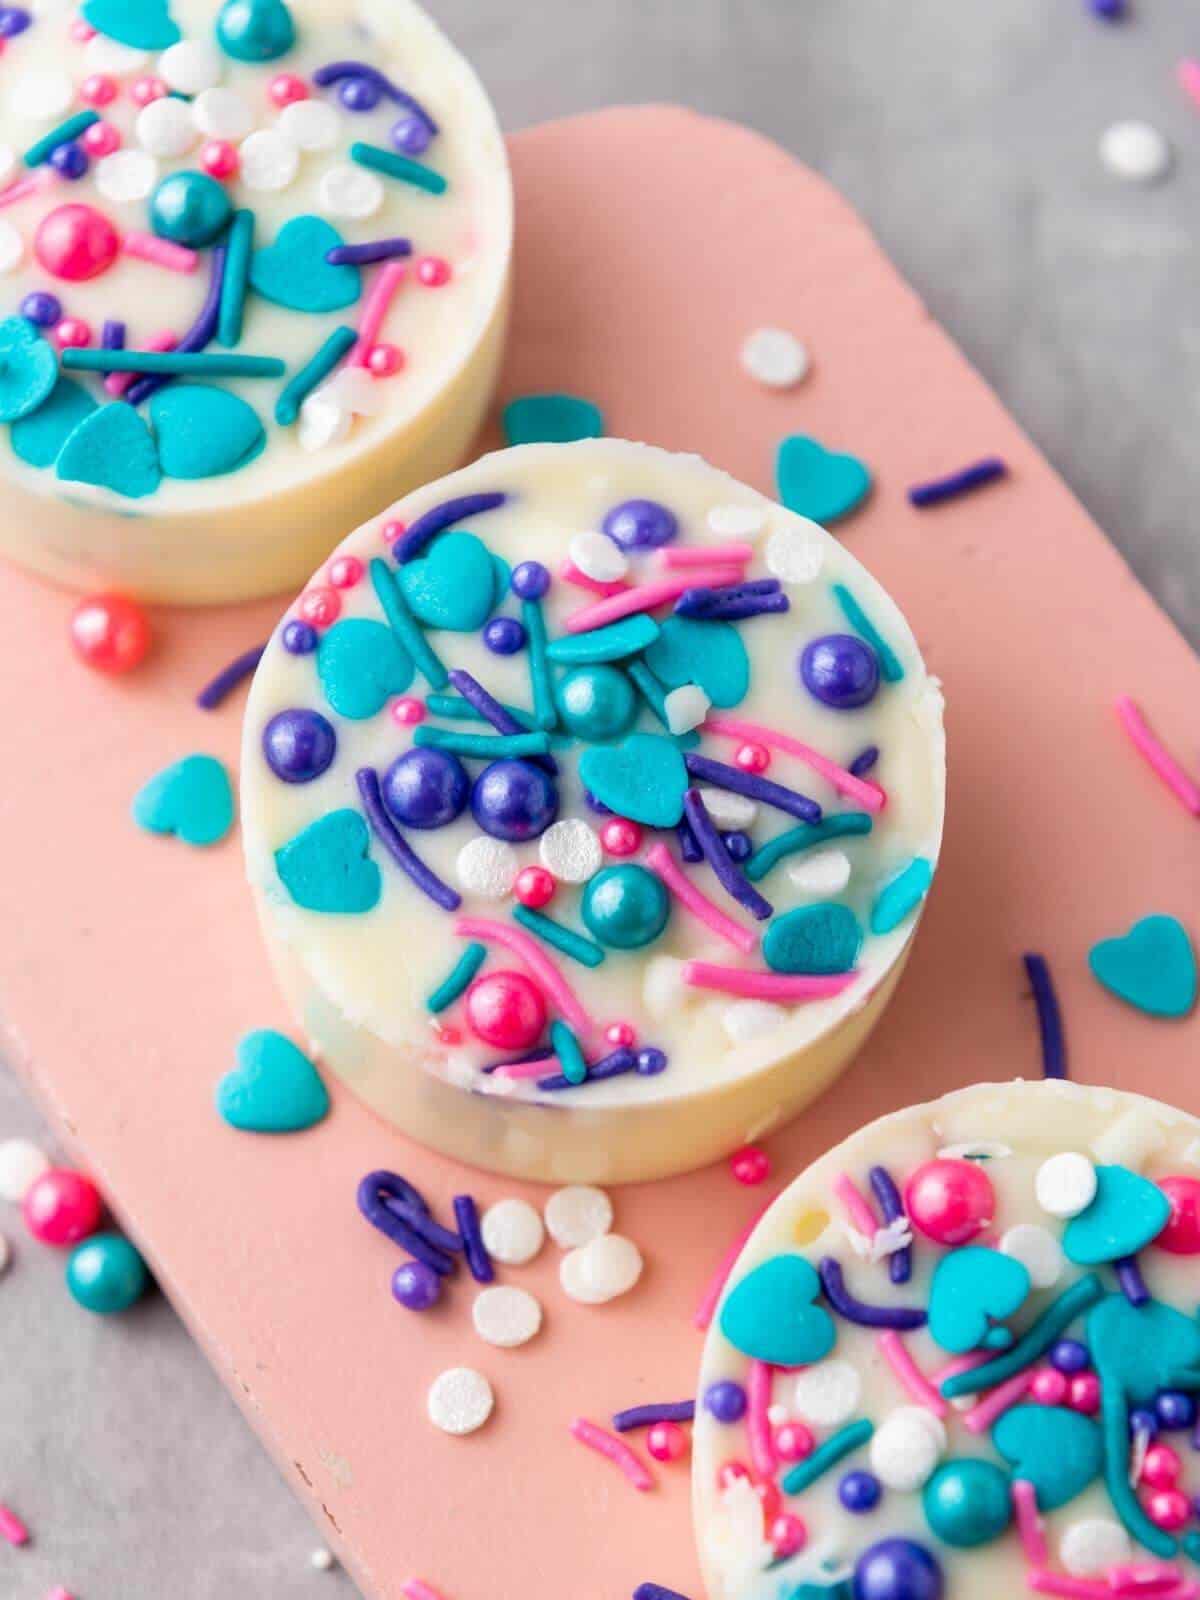 Three white chocolate covered oreos with colorful sprinkles.